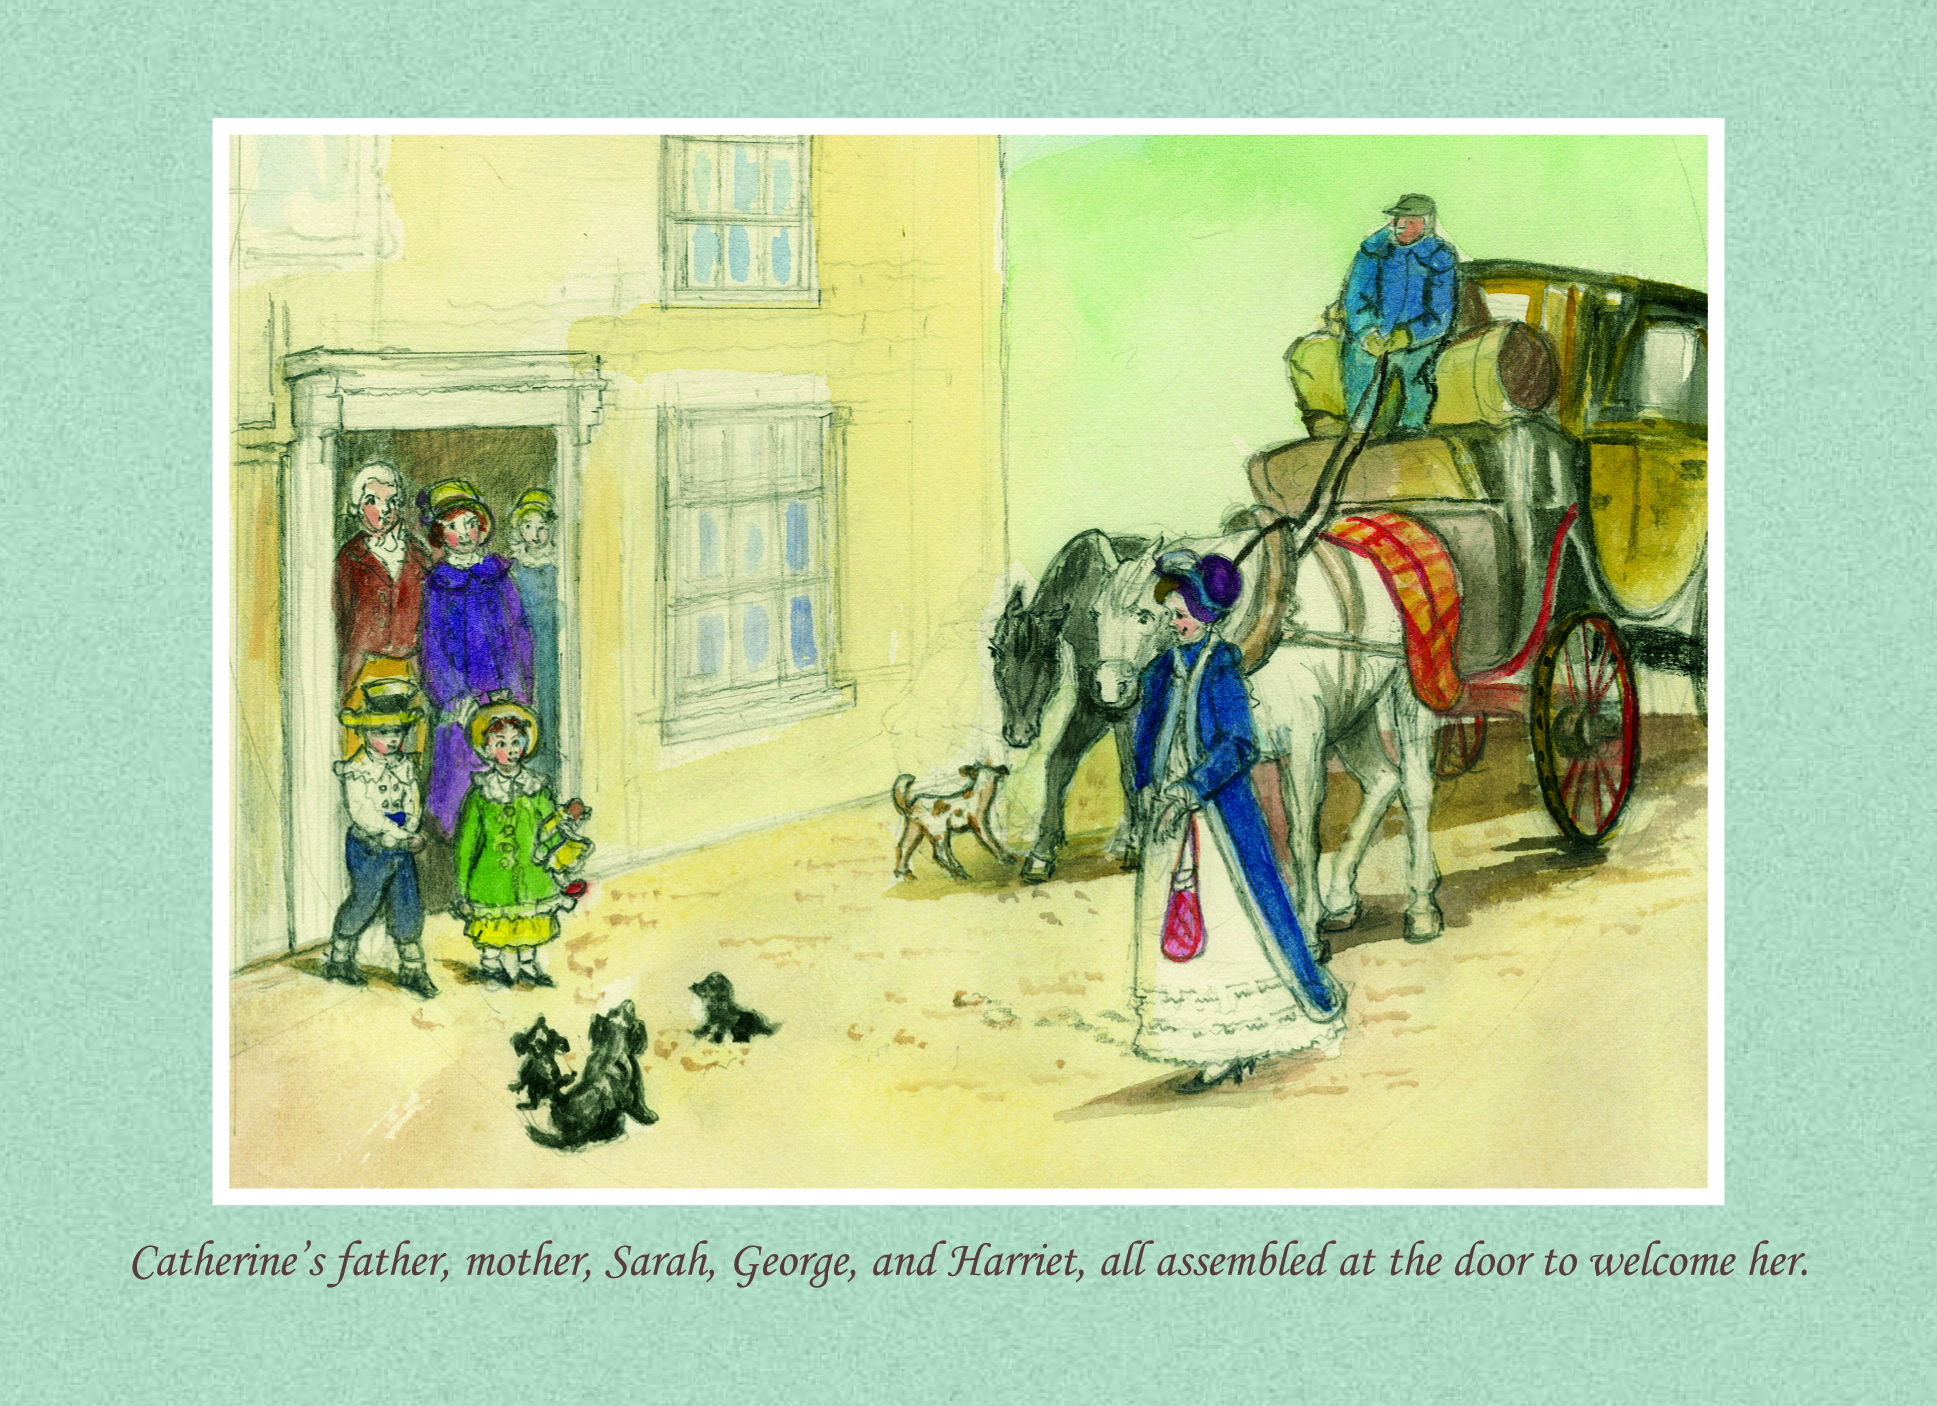 Catherines father mother Sarah and Harriet all assemble at the door to welcome her - Jane Austen card on sale at Winchester Cathedral gift shop.